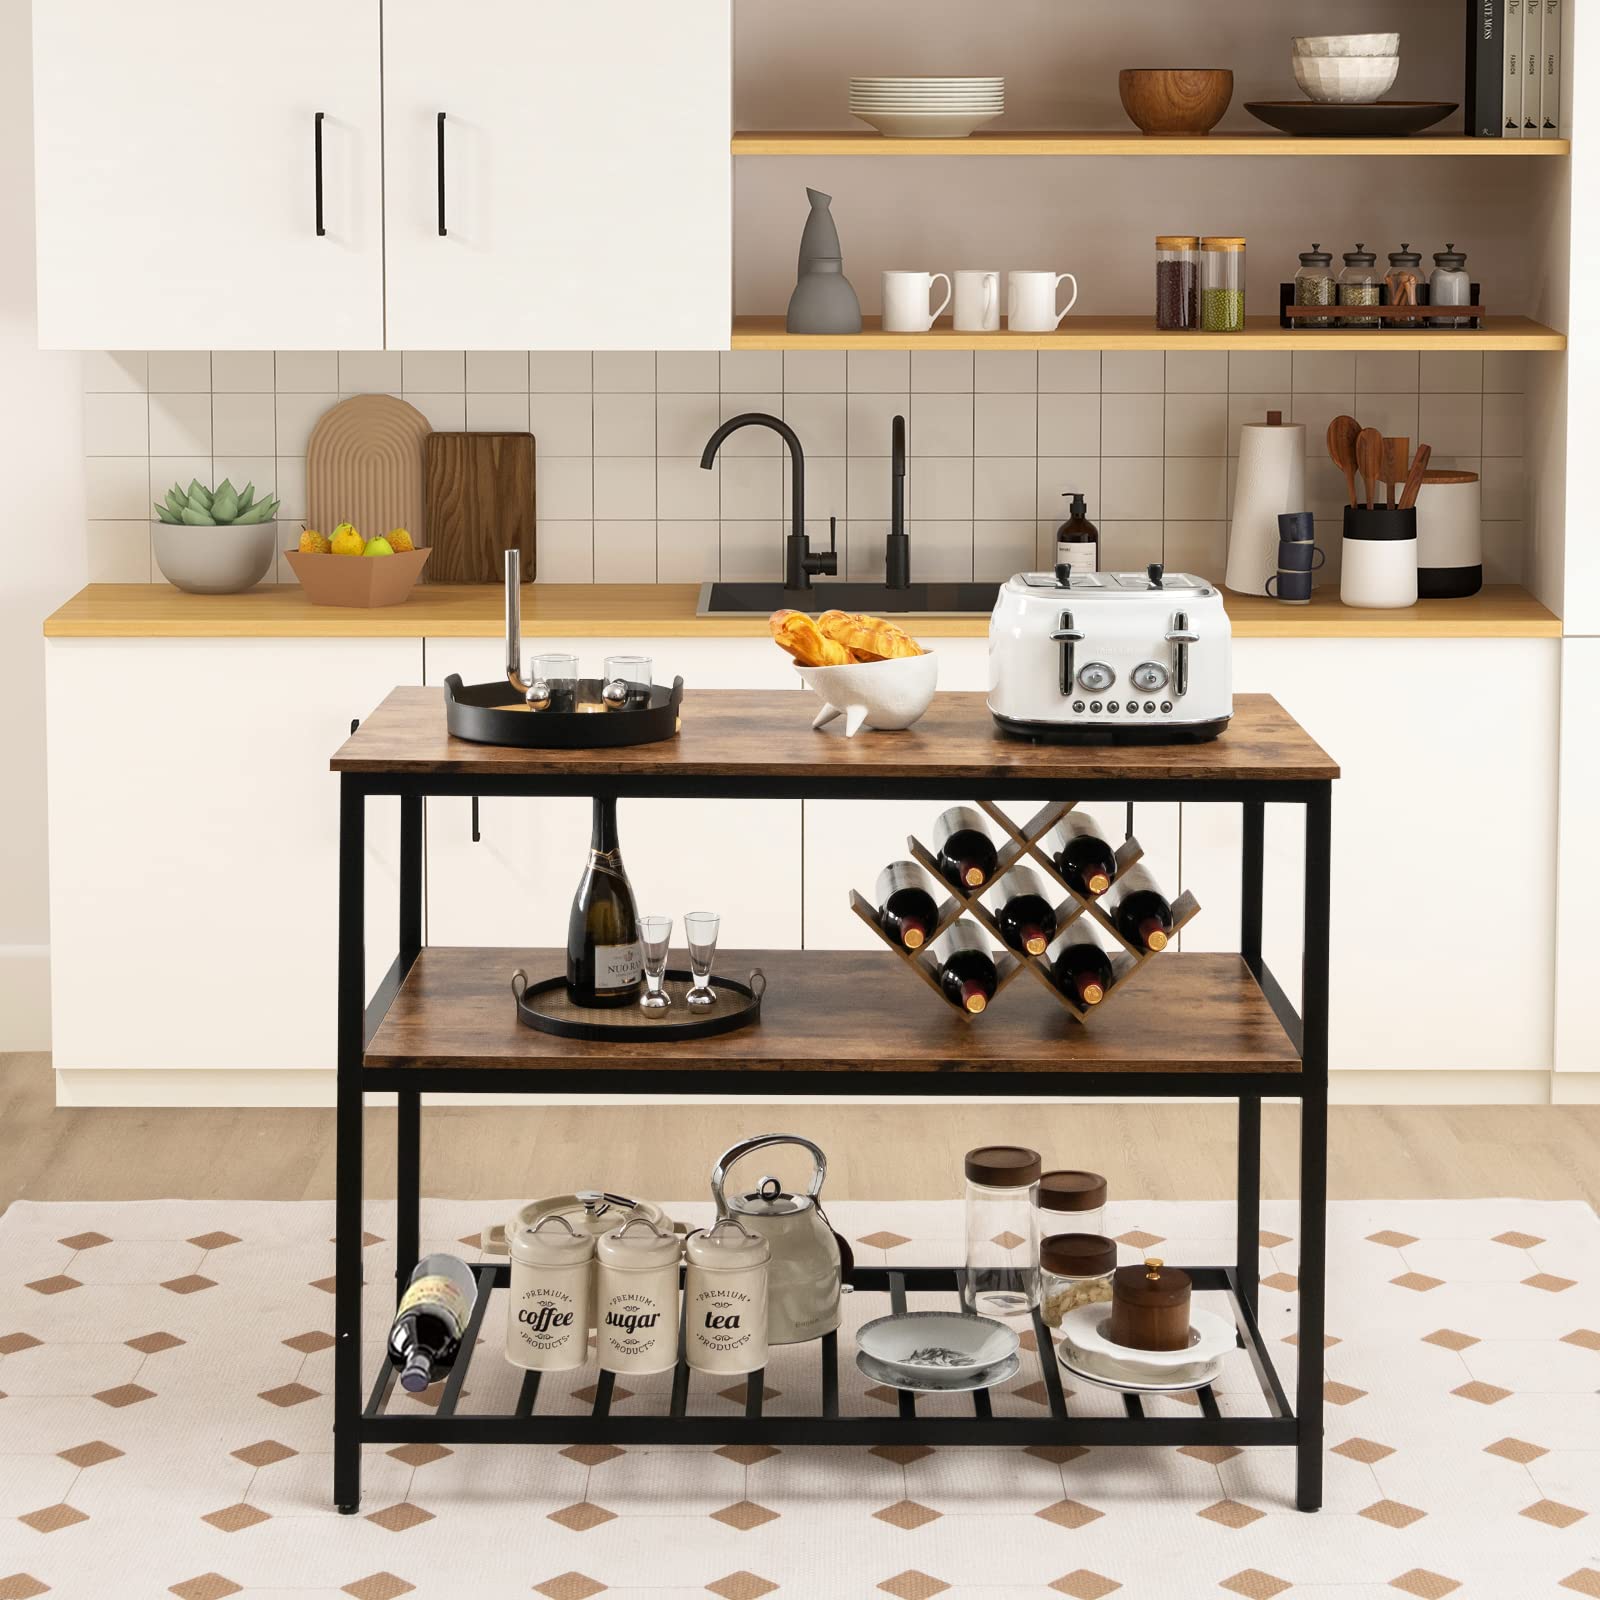 Giantex Kitchen Island with 3 Tier Storage Shelves, 48 Inch Baker Rack with Spacious Worktop (Rustic Brown & Black)